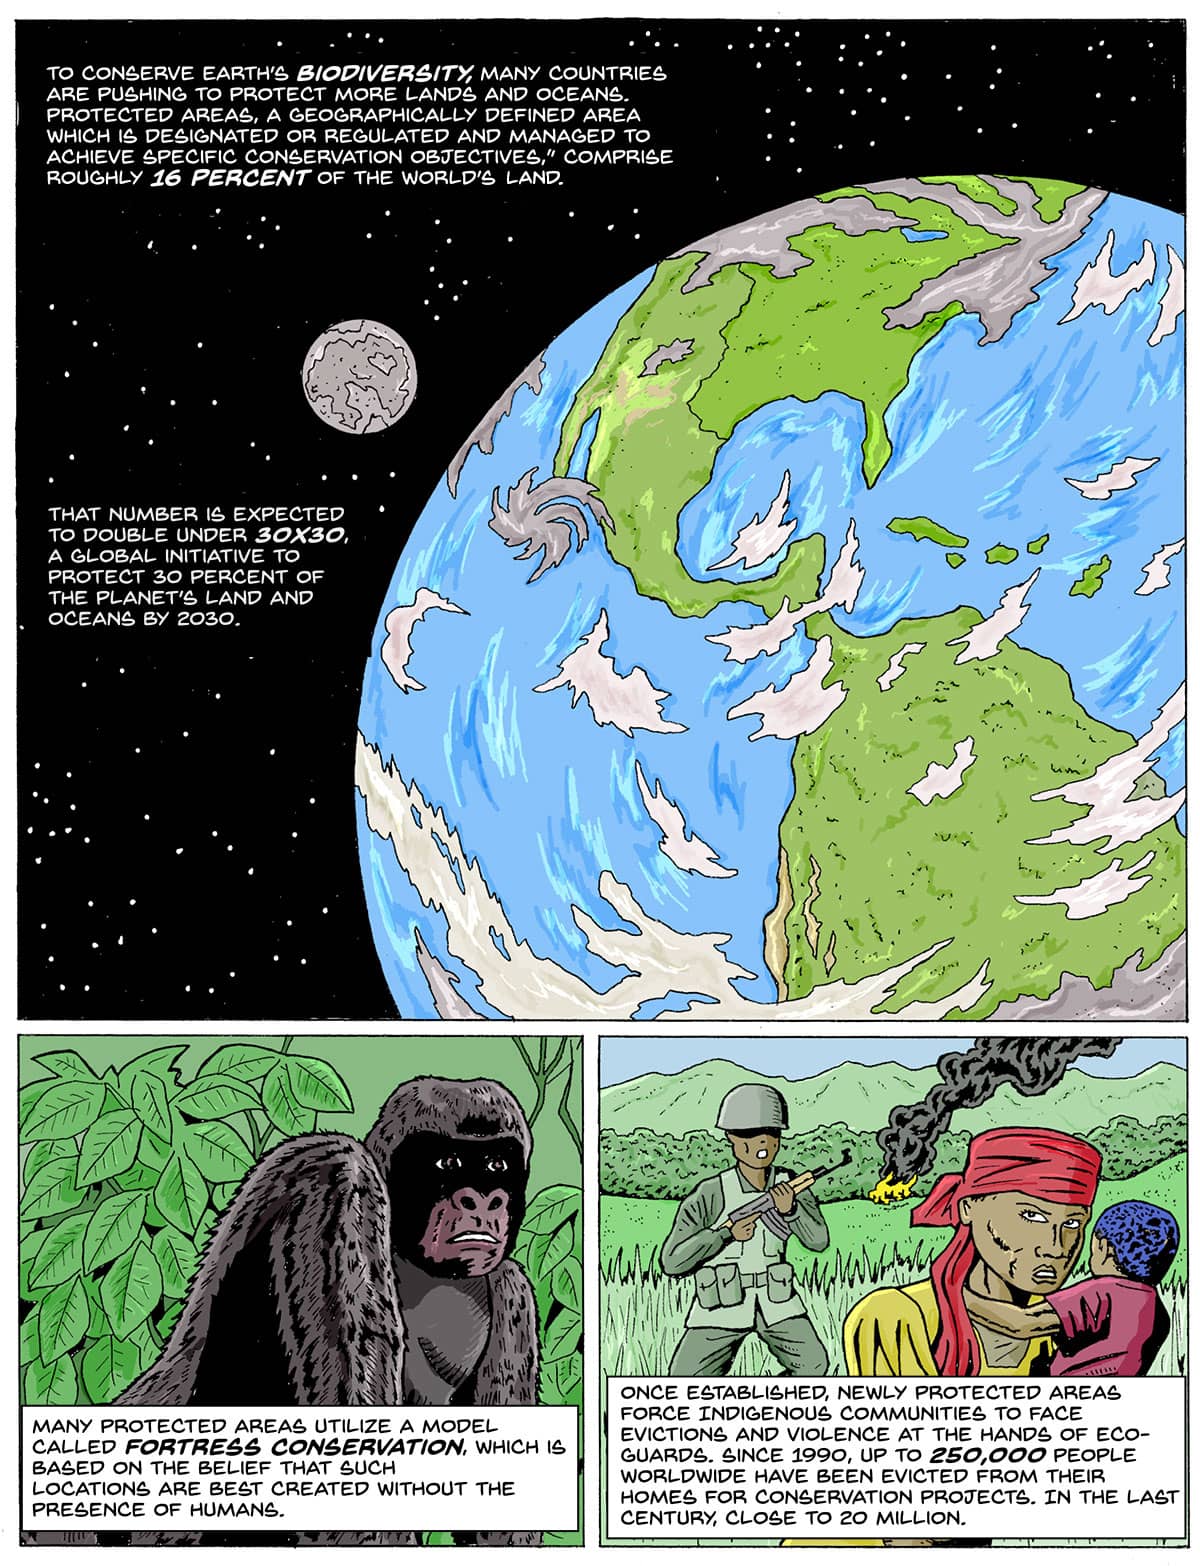 A trip-panel comic. Top panel: an illustration of the earth zoomed out also show the moon. The bottom two panels: A gorilla in the jungle; a woman holding a child looking at a soldier while a house burns in the background. Text: Fortress Conservation: A Legacy of Violence To conserve Earth’s biodiversity, many countries are pushing to protect more lands and oceans. Protected areas, a “geographically defined area which is designated or regulated and managed to achieve specific conservation objectives,” comprise roughly 16 percent of the world’s land. That number is expected to double under 30X30, a global initiative to protect 30 percent of the planet’s land and oceans by 2030. Many protected areas utilize a model called fortress conservation, which is based on the belief that such locations are best created without the presence of humans. Once established, newly protected areas force Indigenous communities to face evictions and violence at the hands of eco-guards. Since 1990, up to 250,000 people worldwide have been evicted from their homes for conservation projects. In the last century, close to 20 million.